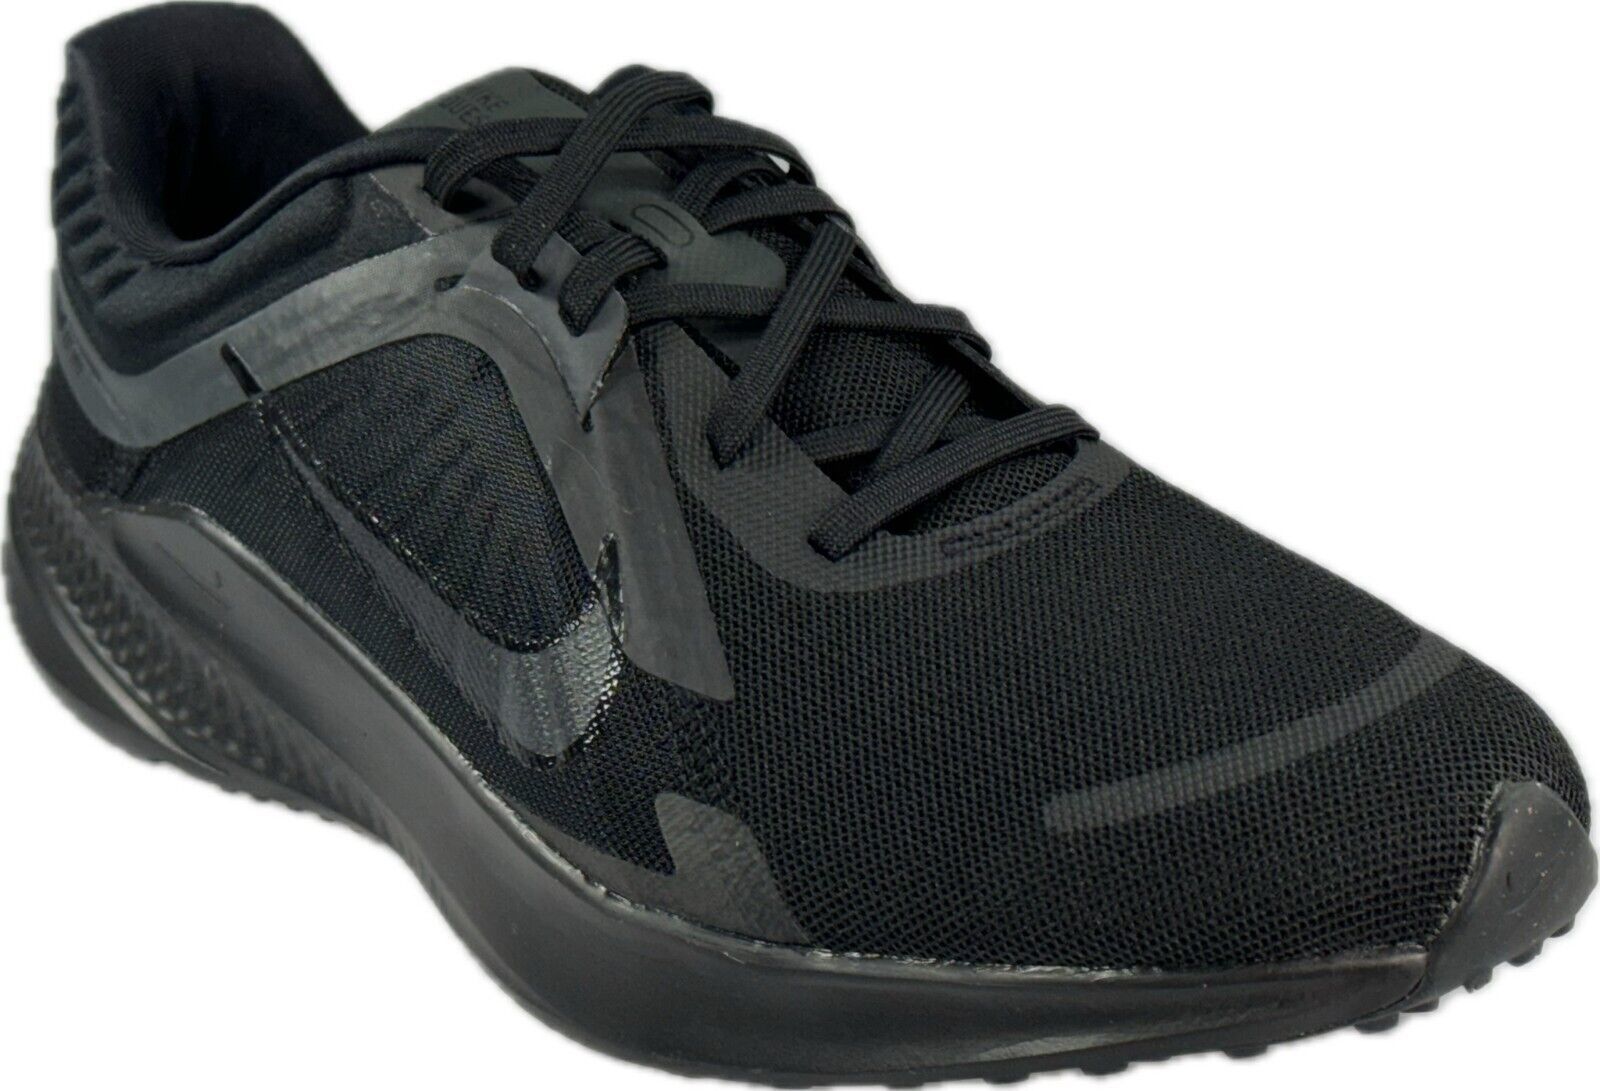 Primary image for Nike Men's Quest 5 Black Running Shoes, DD0204-003